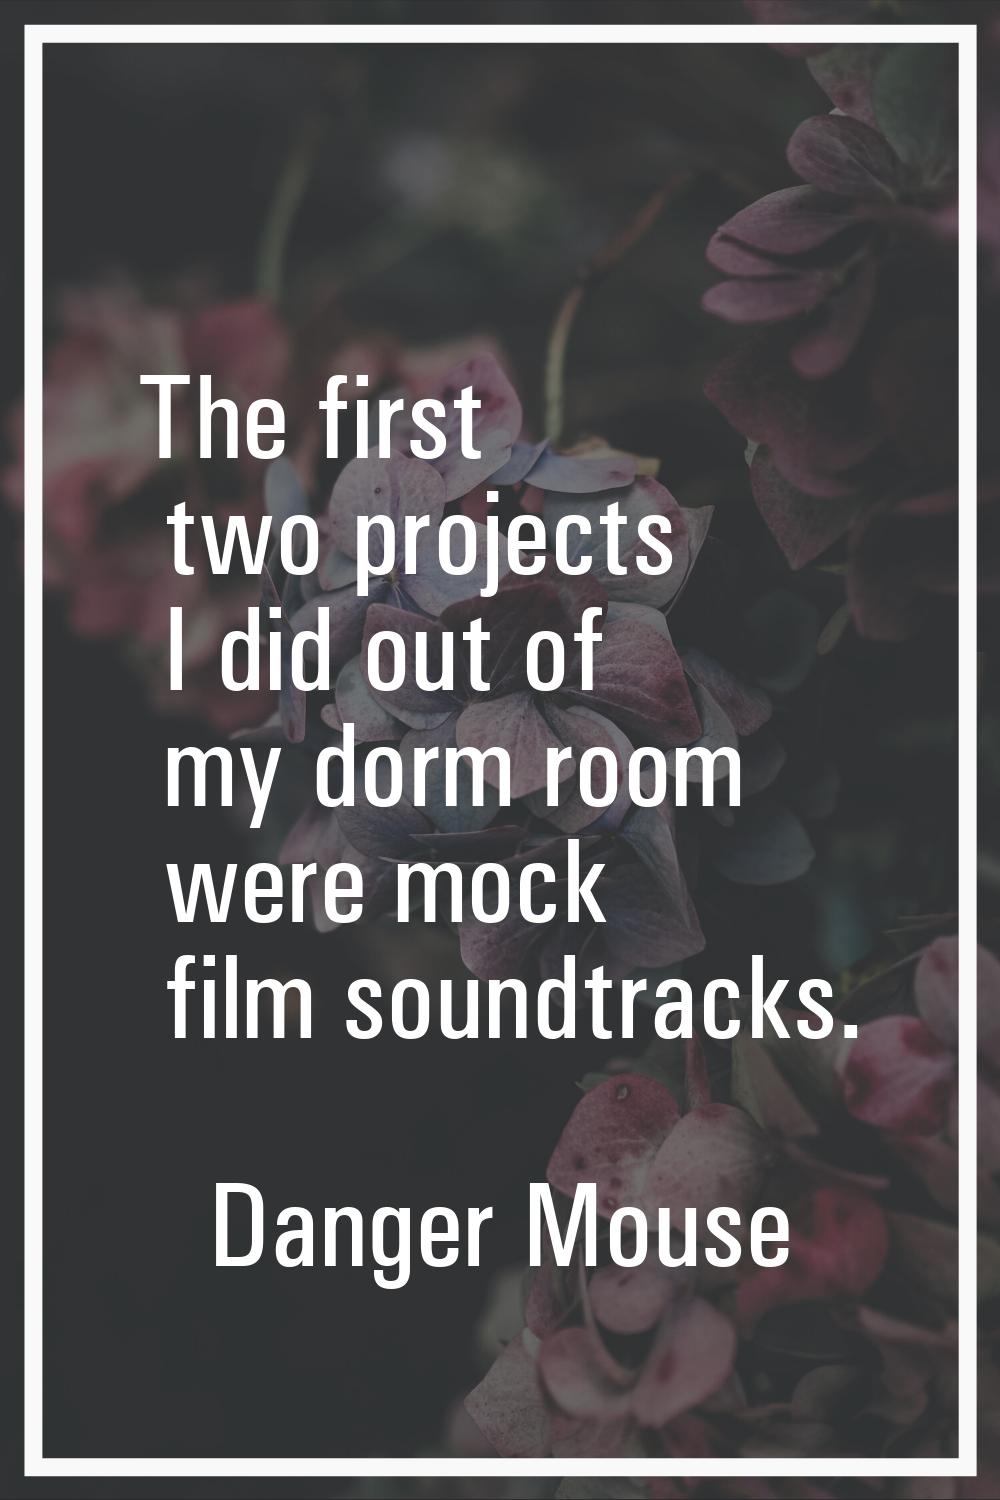 The first two projects I did out of my dorm room were mock film soundtracks.